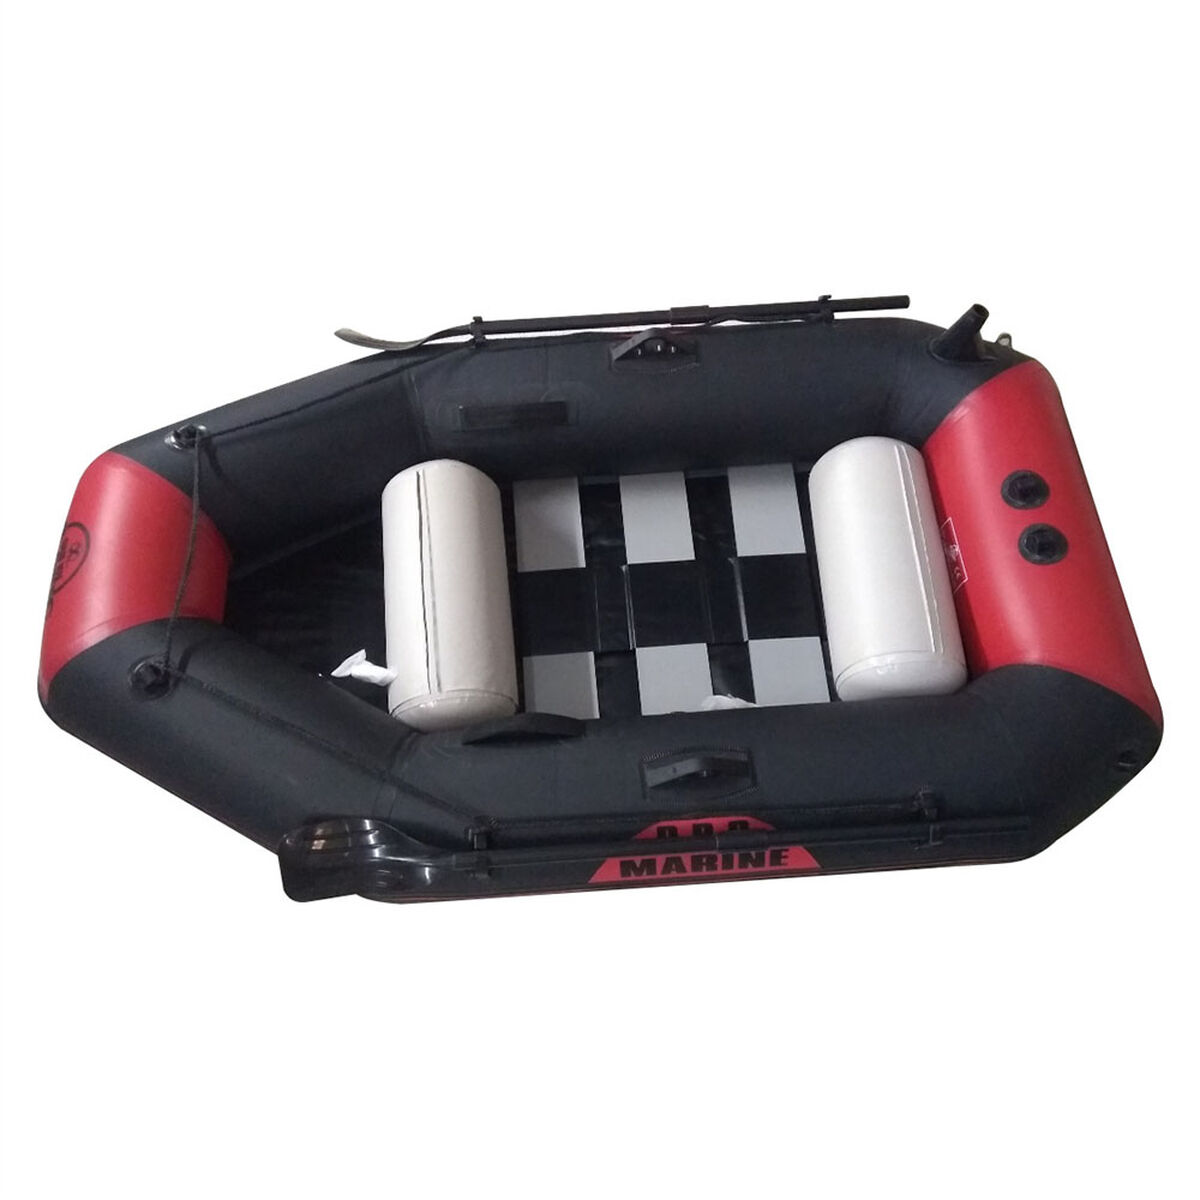 Bote Inflable Ibp 200 Promarine 2 Personas